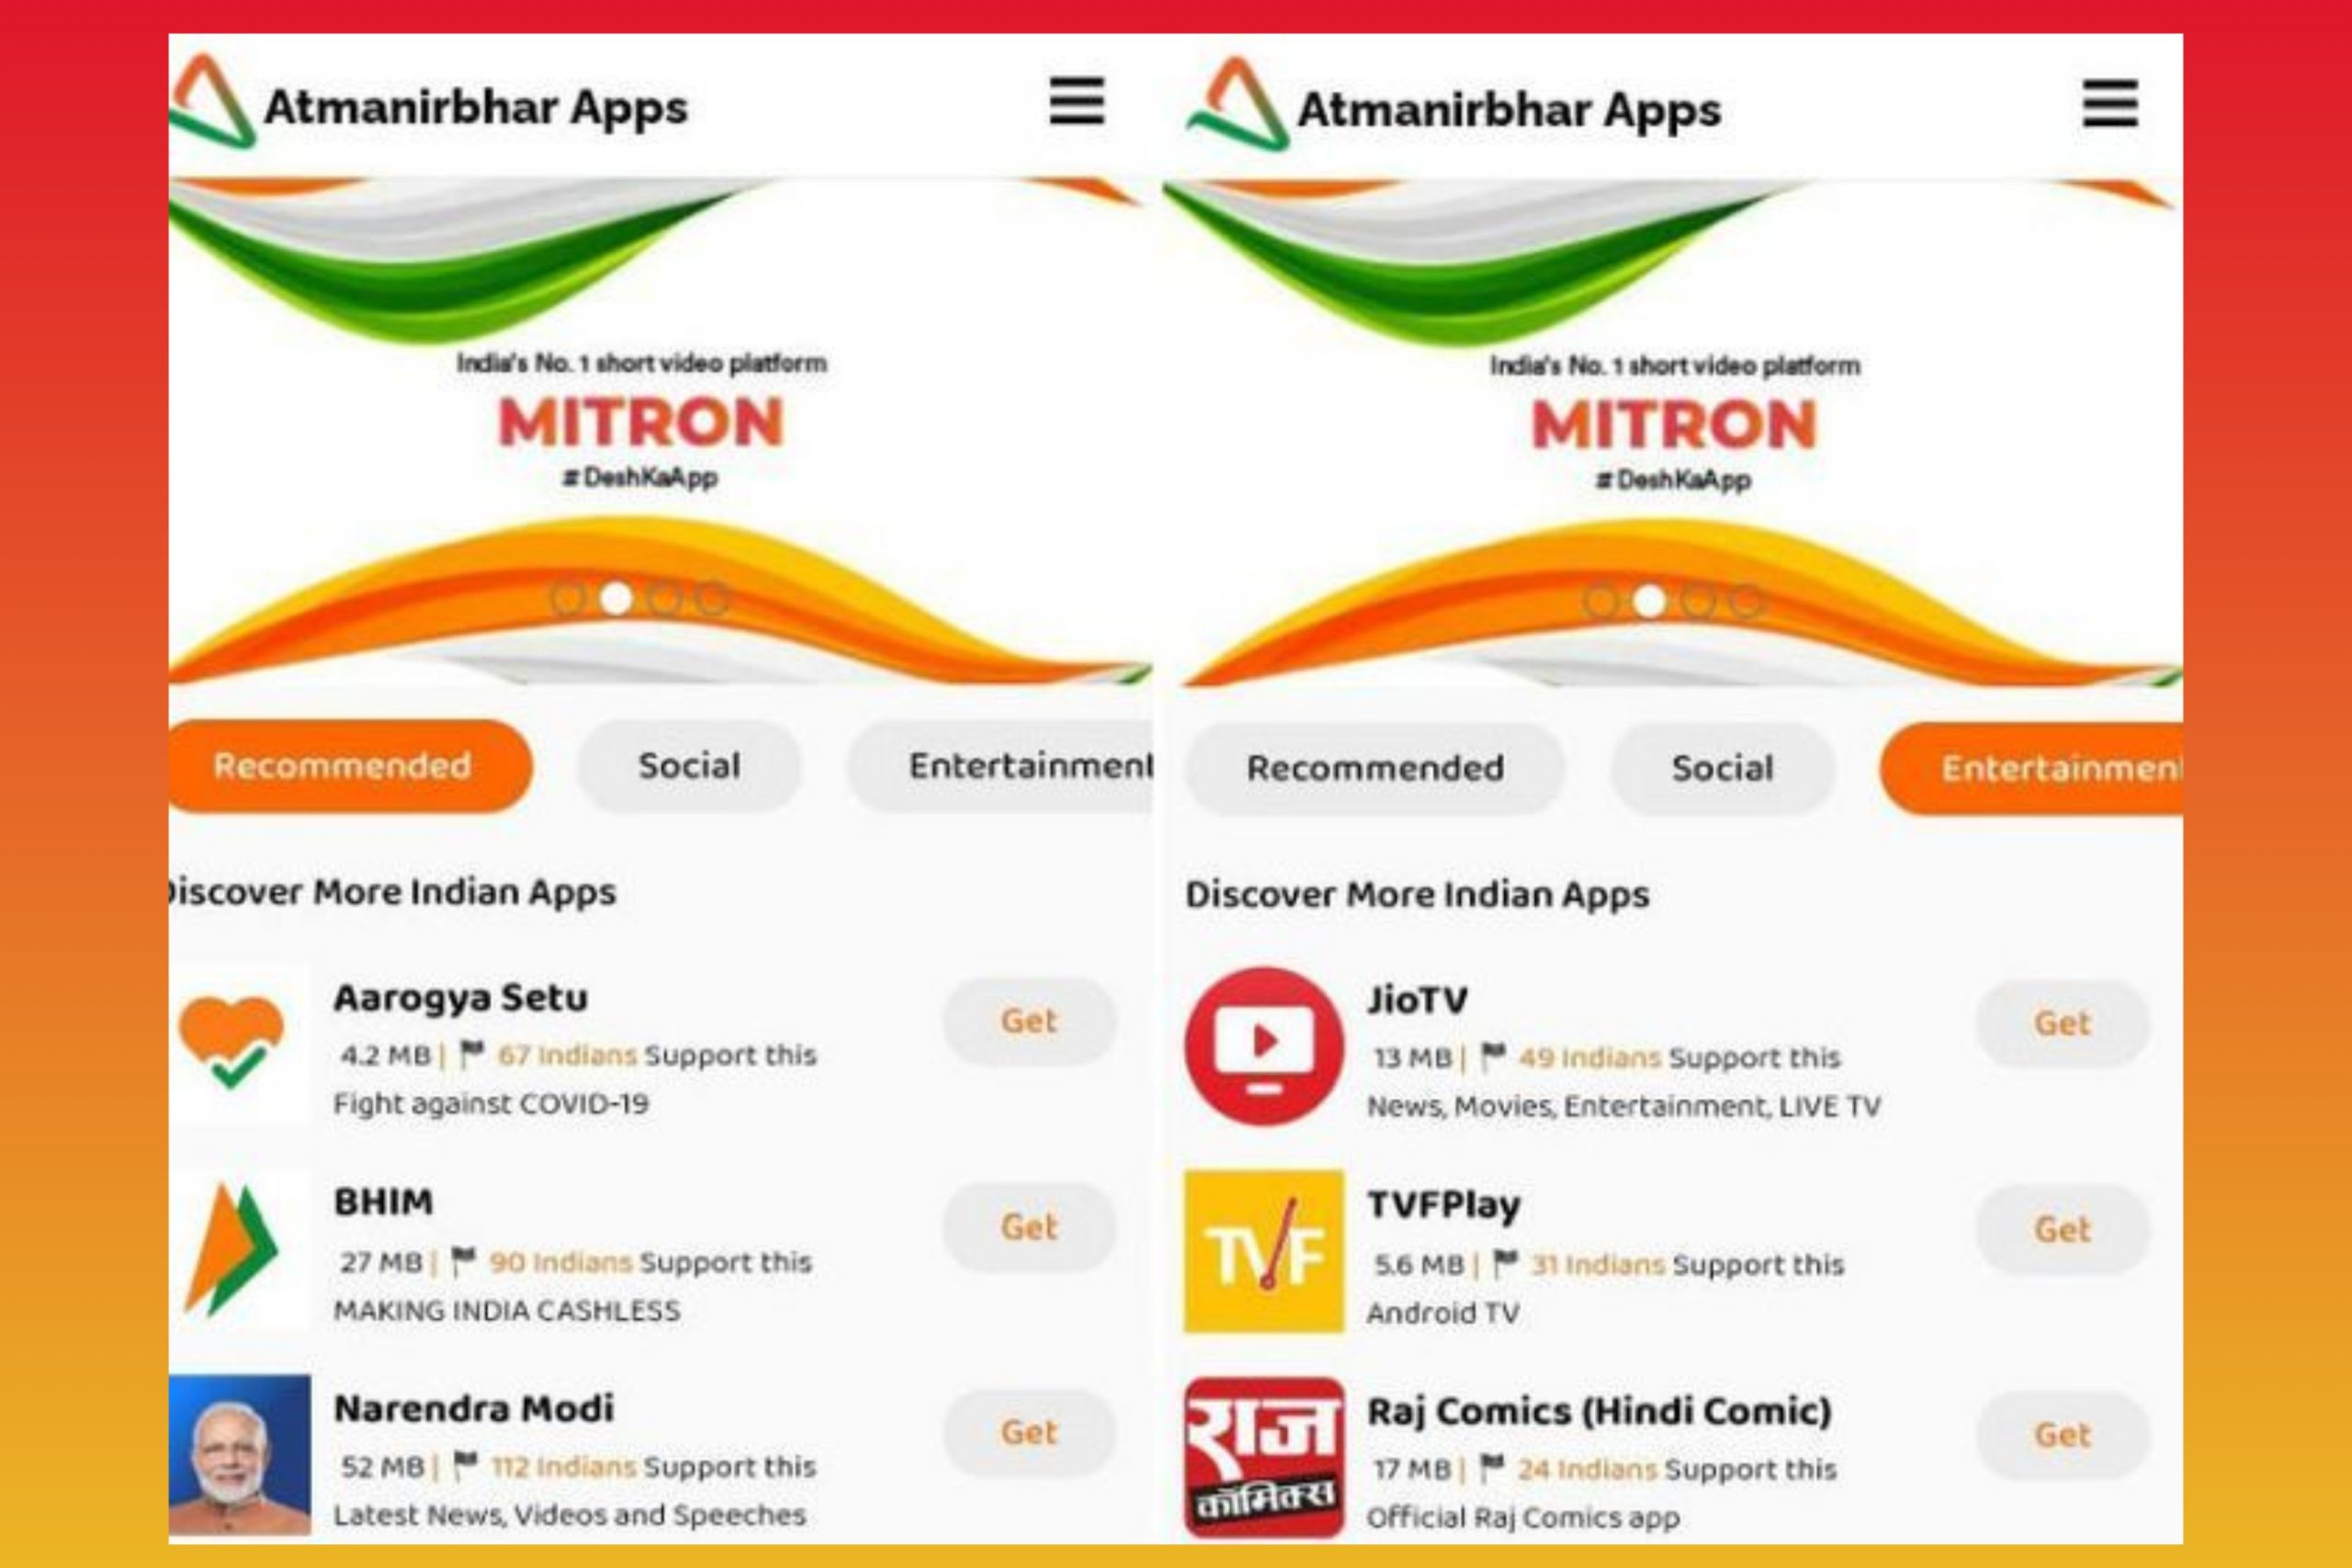 Aatm nirbhar Bharat: All Bhartiya app will be available in one place